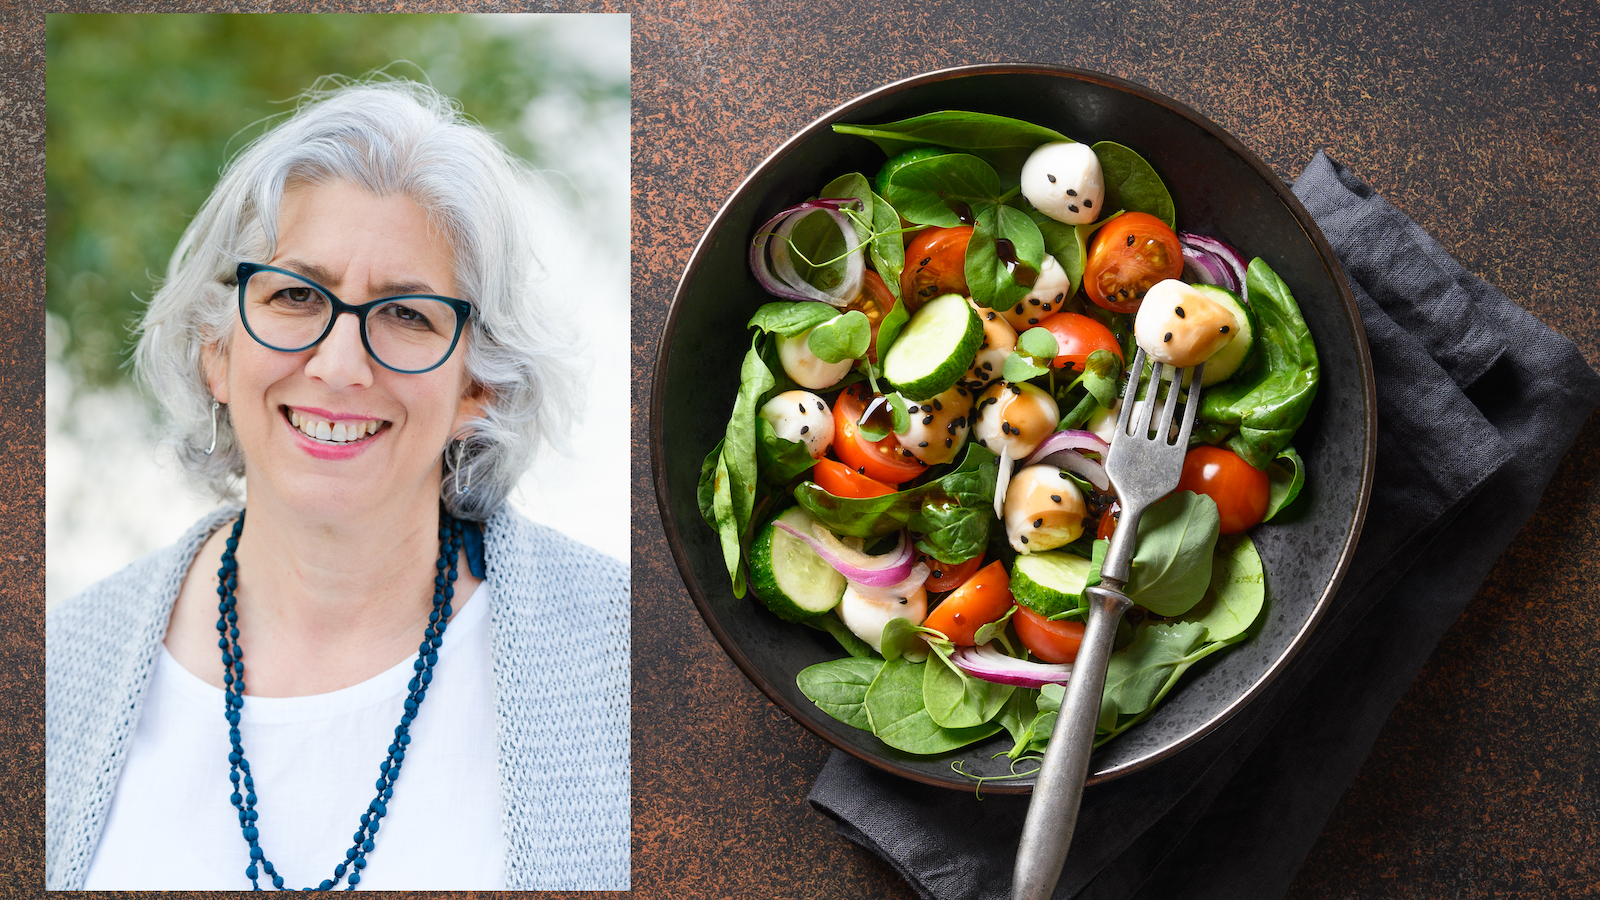 Author Judy Simon inset with image of healthy salad